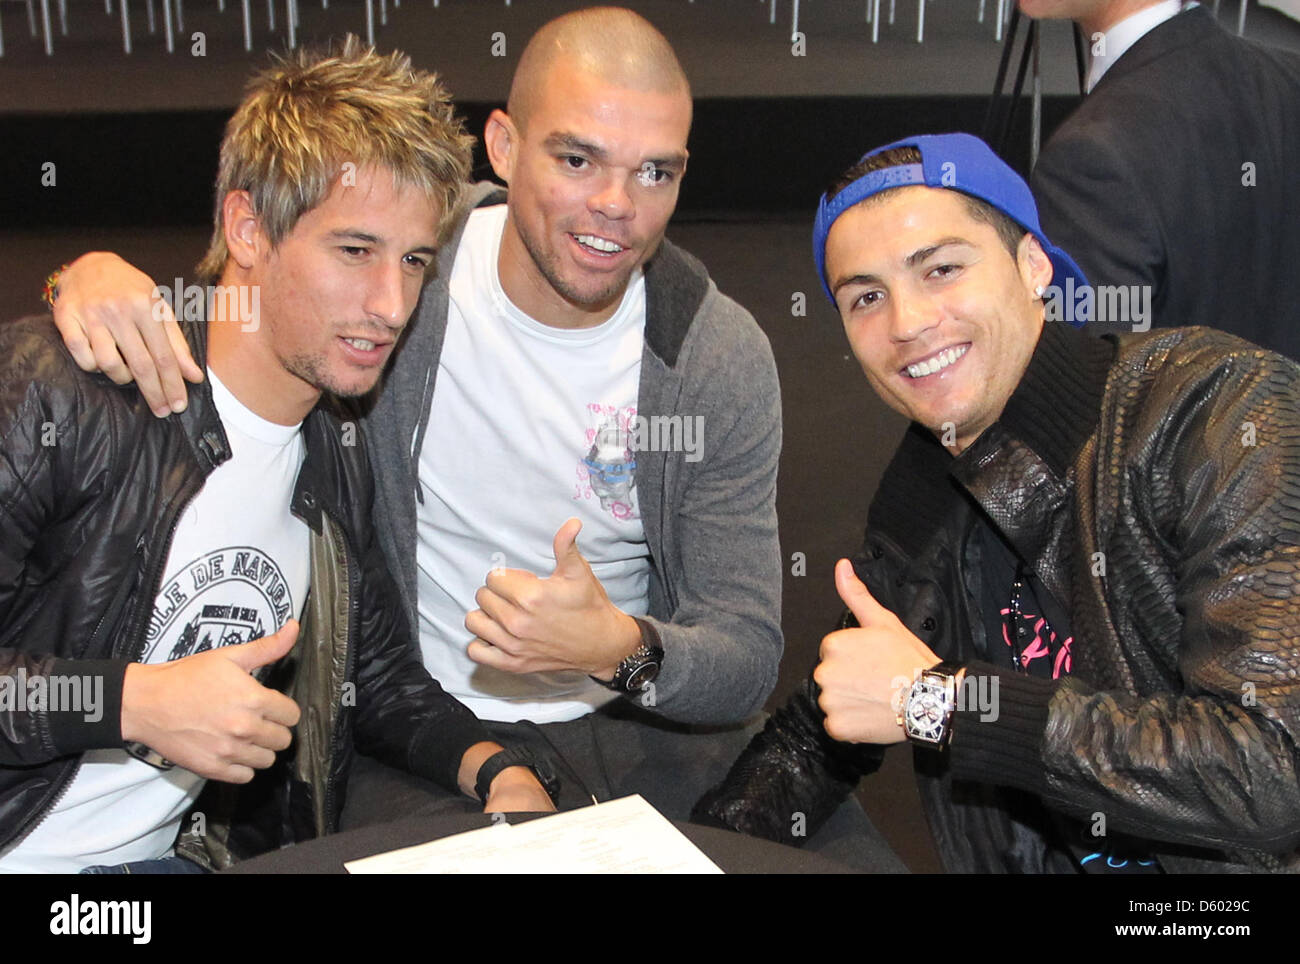 A handout picture taken on 8 November 2012 shows the Real Madrid players Ronaldo Fabio Coentrao (l), Pepe (M) und Ronaldo (r)  at the race track in Madrid, Spain. Players and choaches received their new official vehicles from the team's sponsor. The event was open to the public and attended by a big group of people. Photo: Karl-Josef Hildenbrand Stock Photo